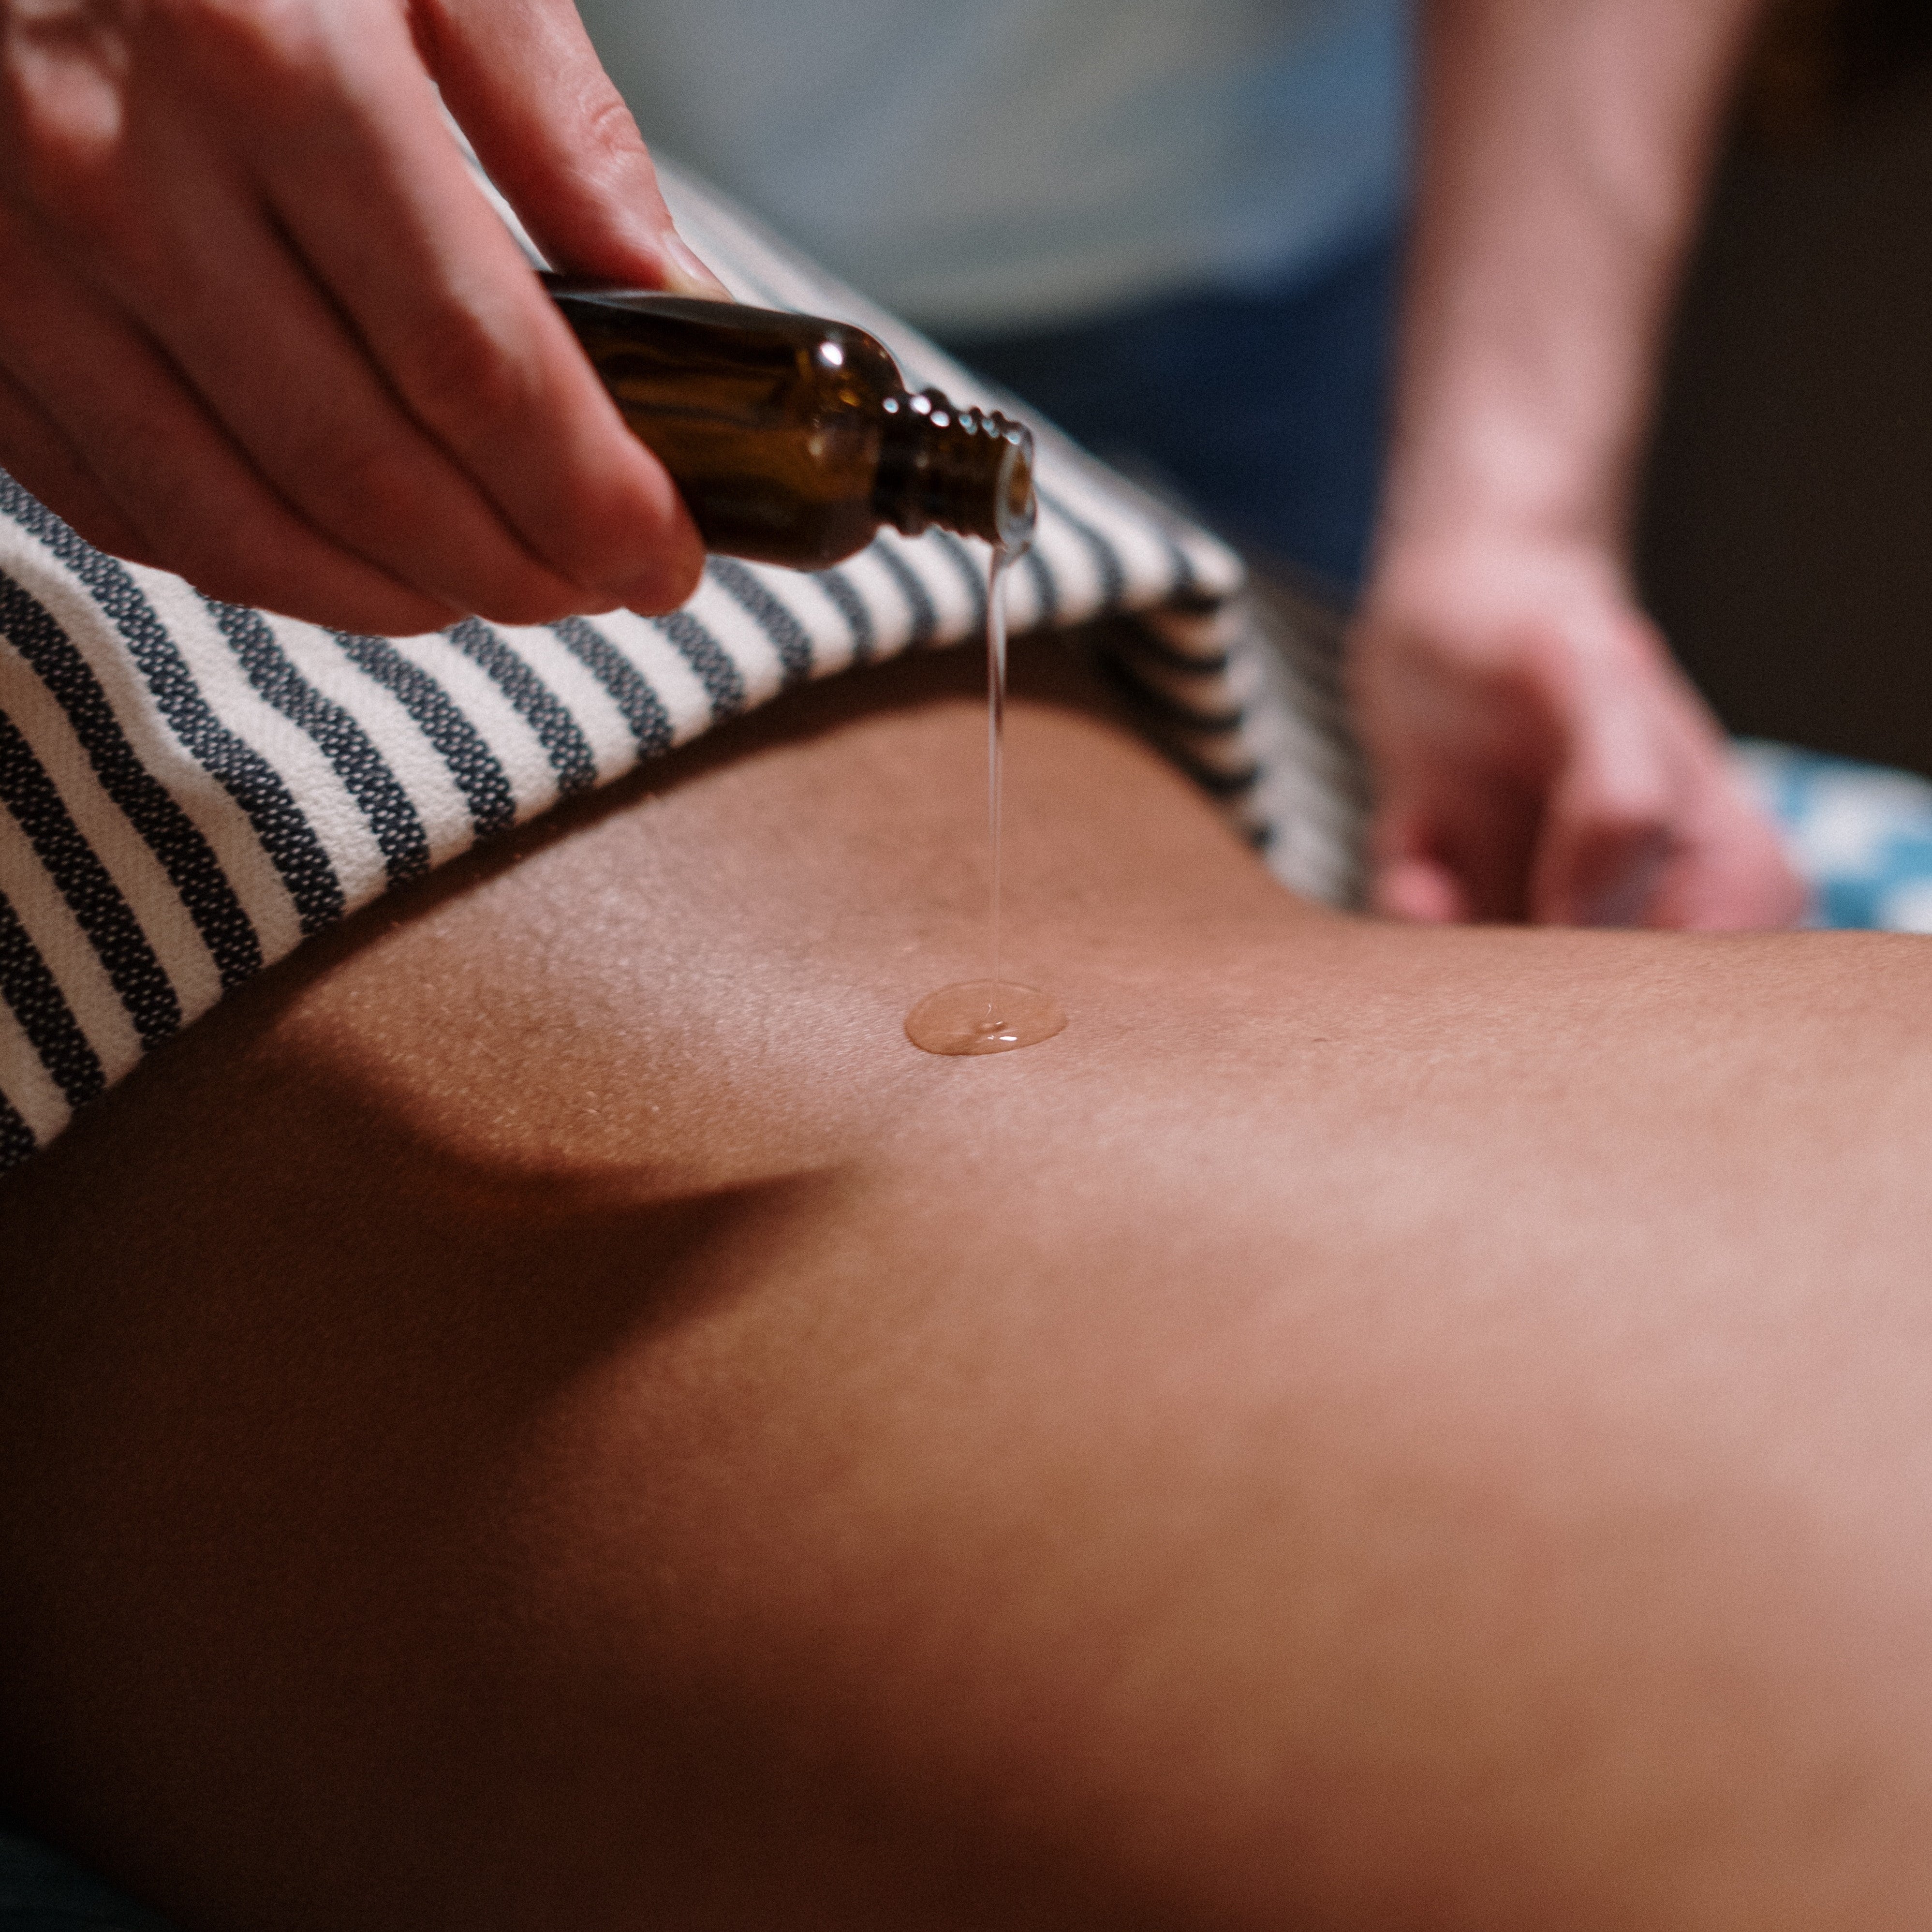 Massage oil being applied to back.